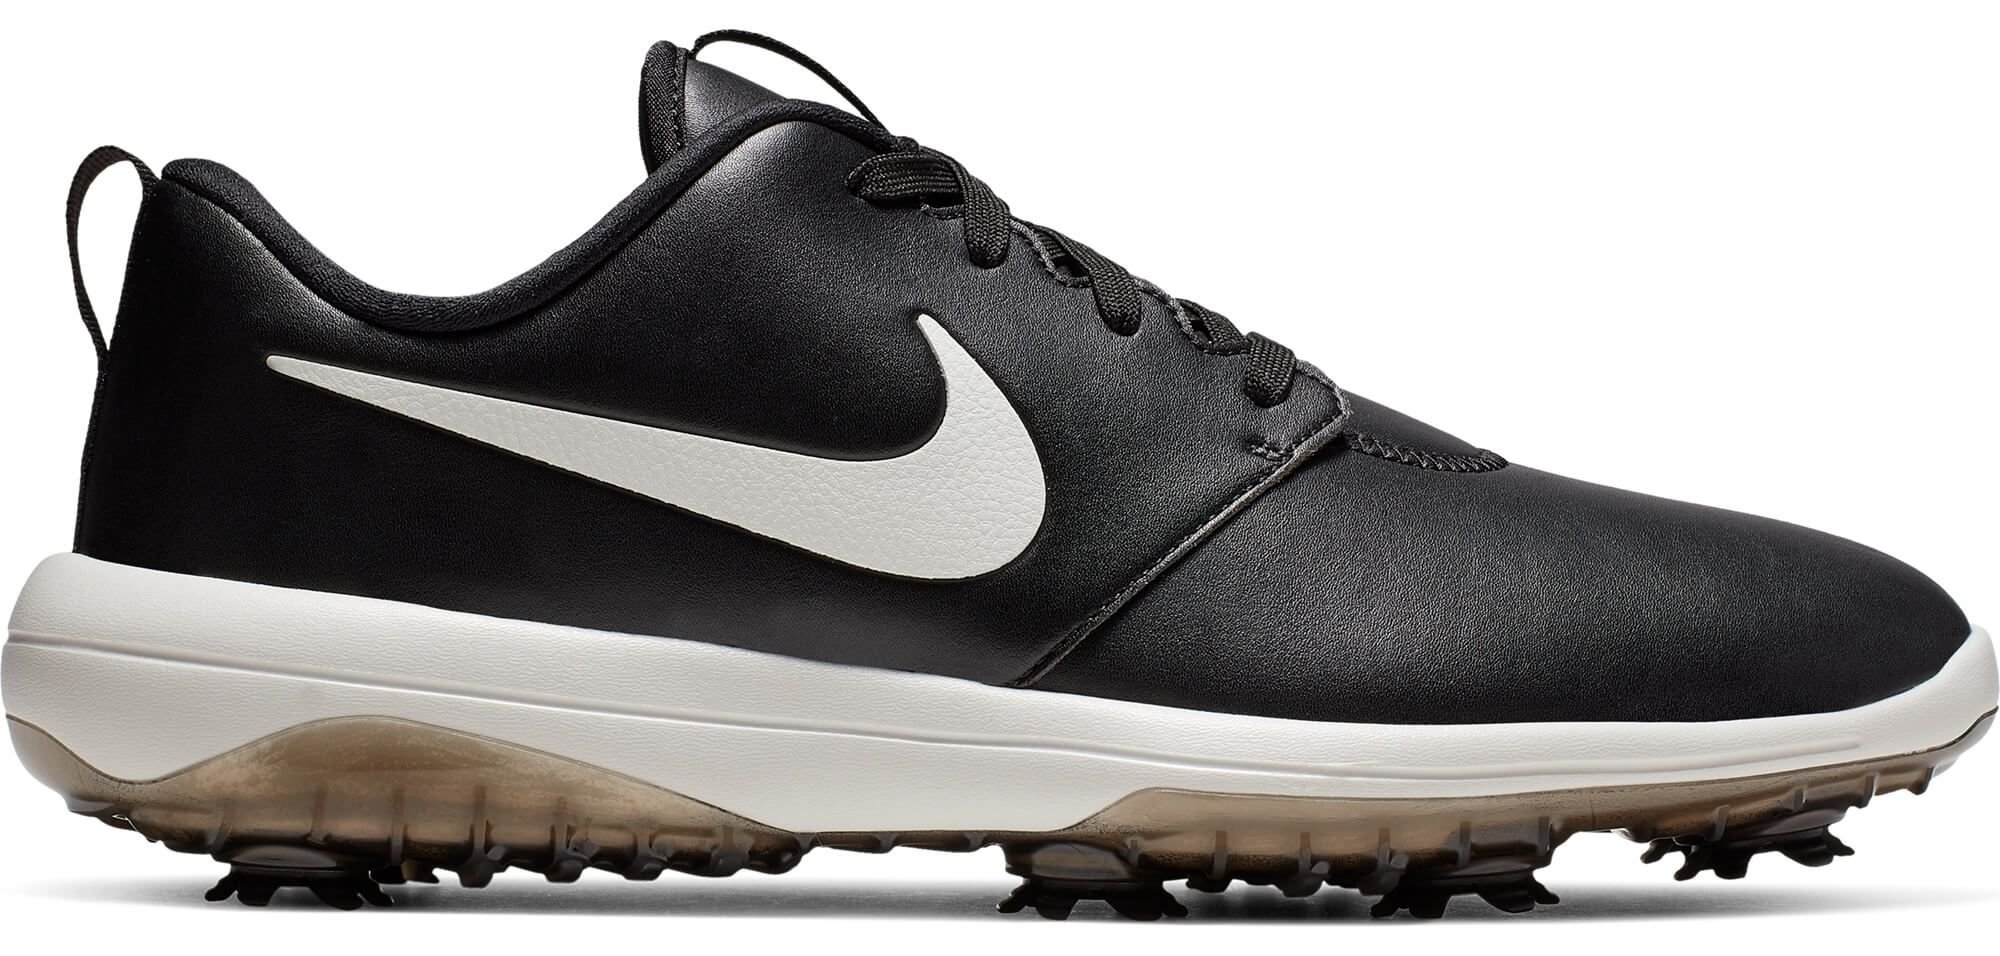 Nike G Tour Golf Shoes Black/White Contrast Swoosh - Carl's Golfland